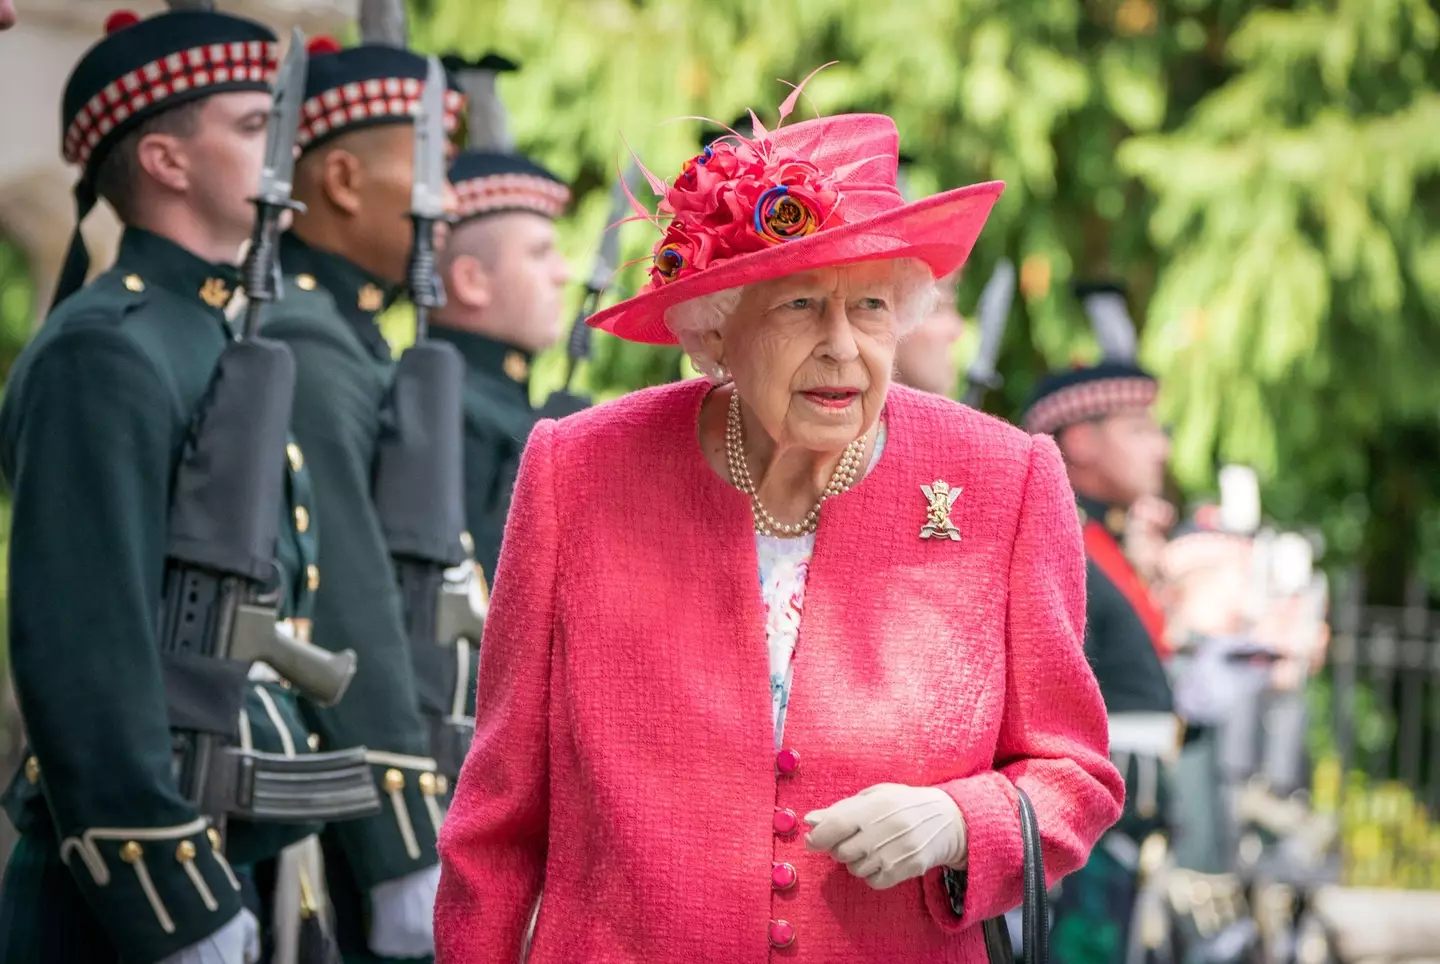 There's a four day weekend for the Queen's Platinum Jubilee (